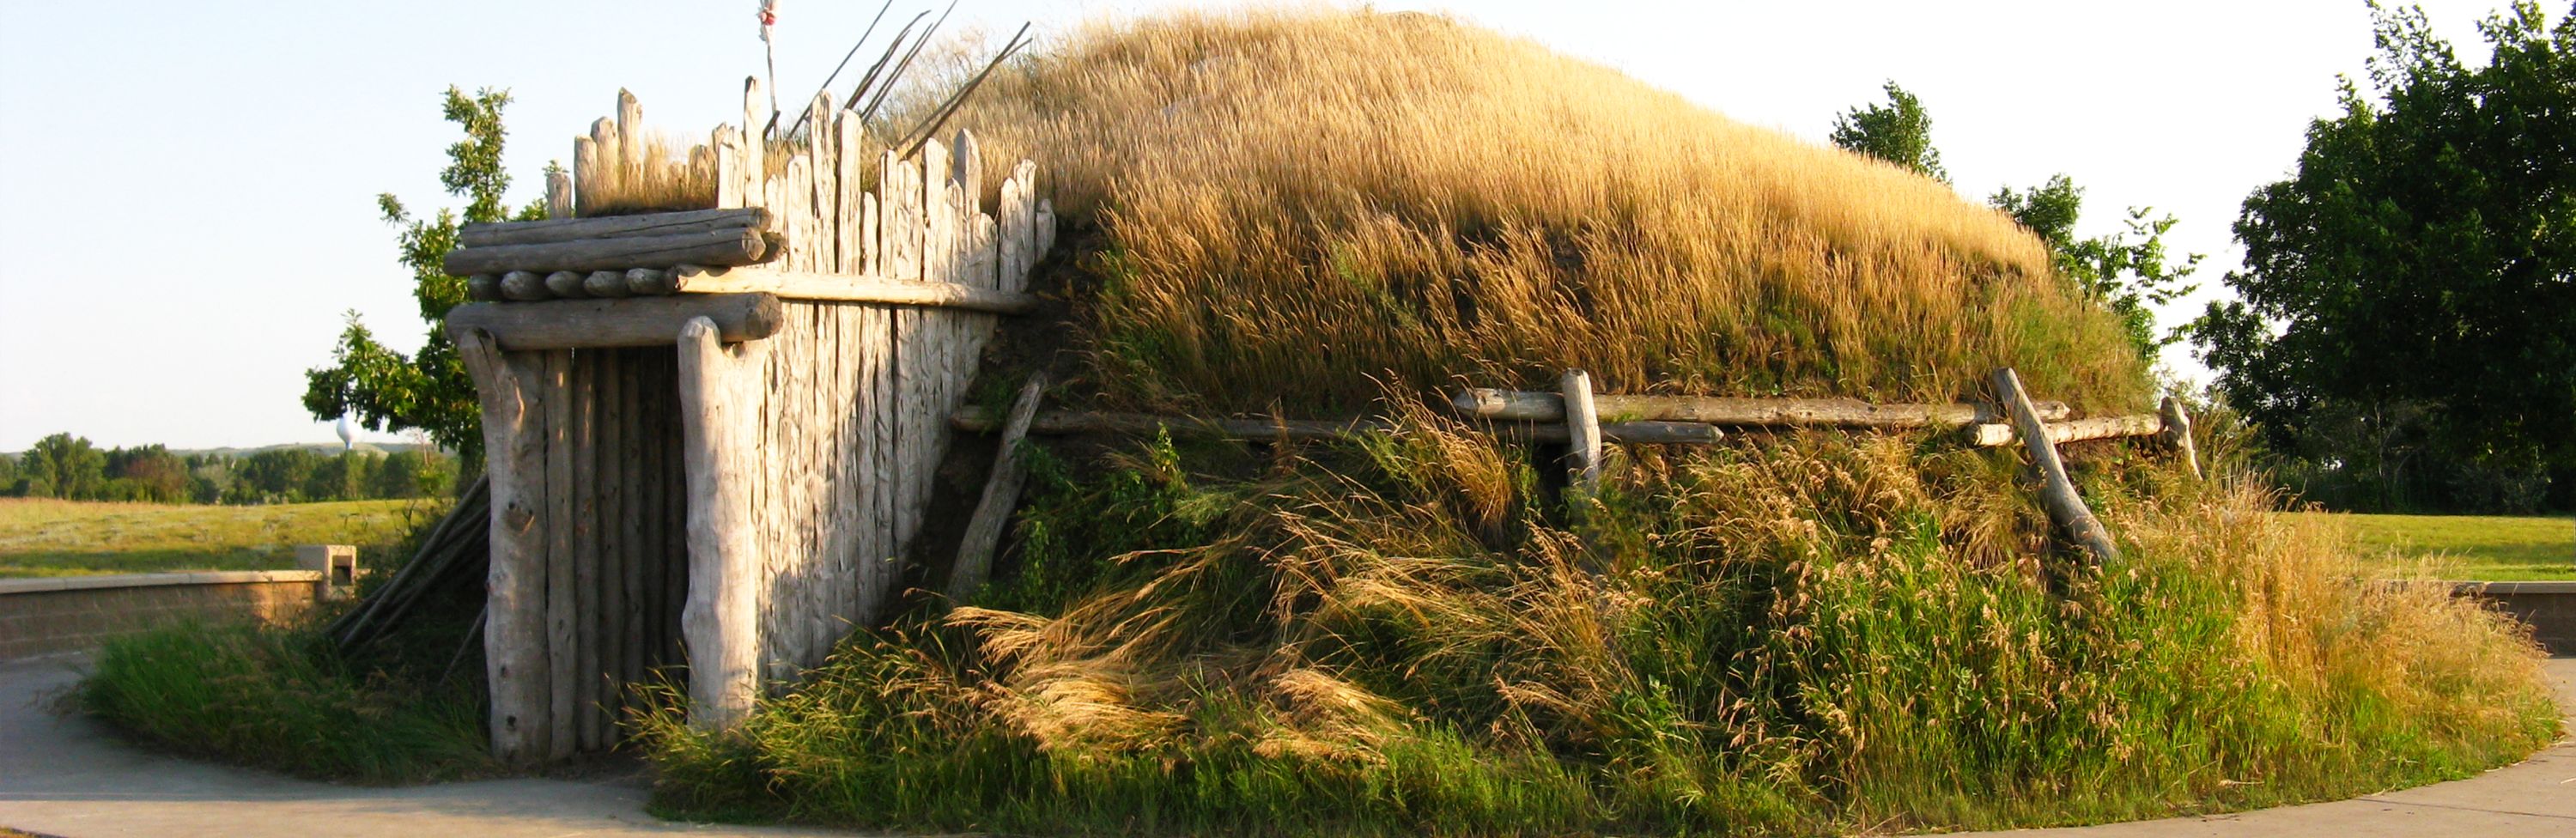 northern plains native american earthen home